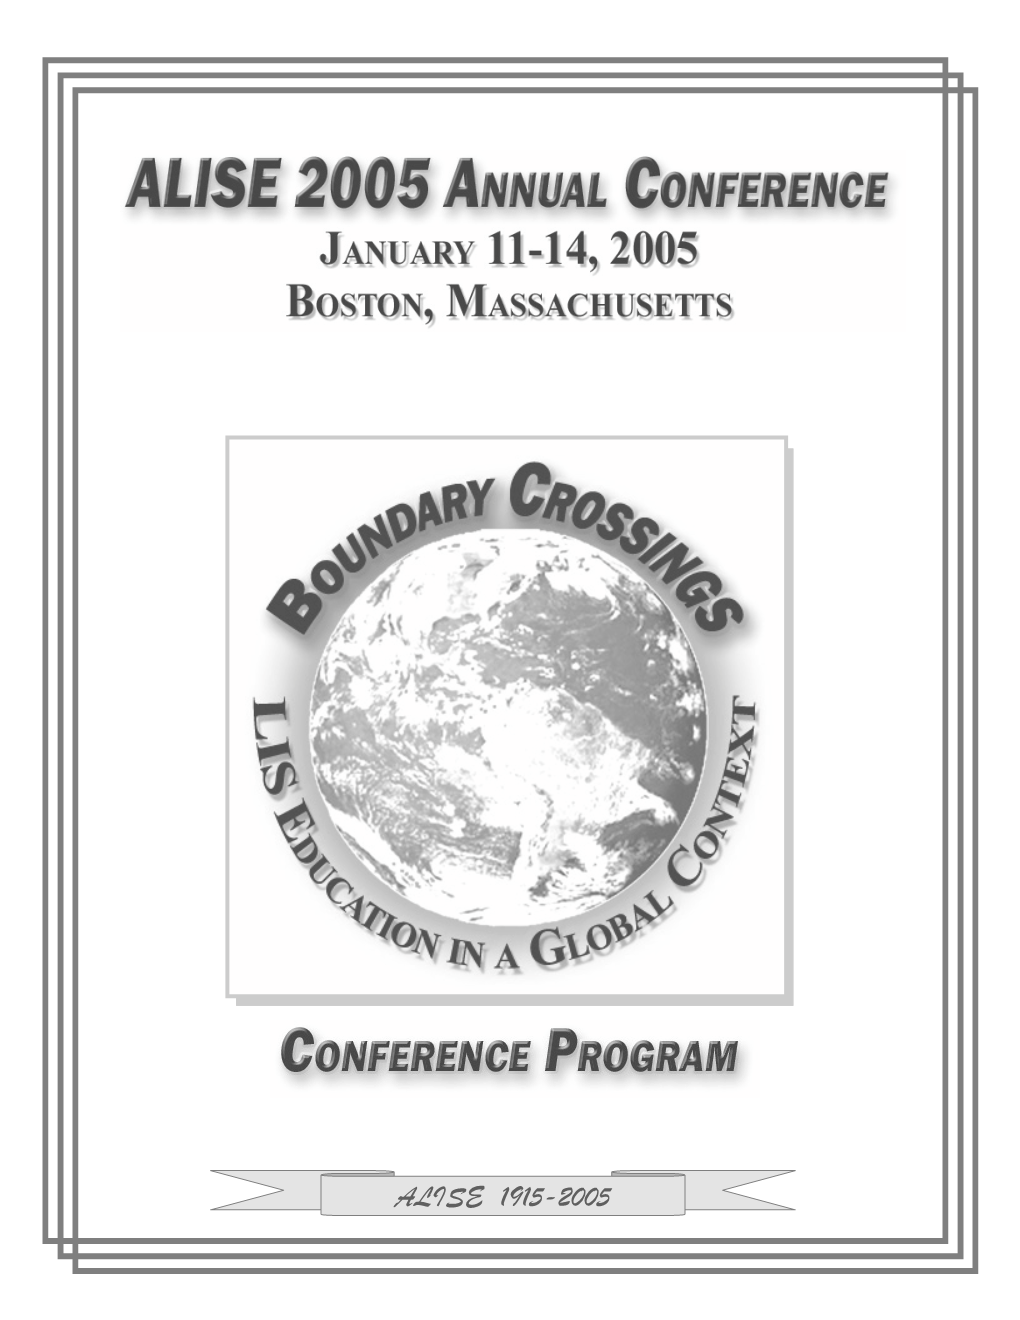 Conference Program a Dozen Reasons to Attend ALISE 2005 Planning Committee